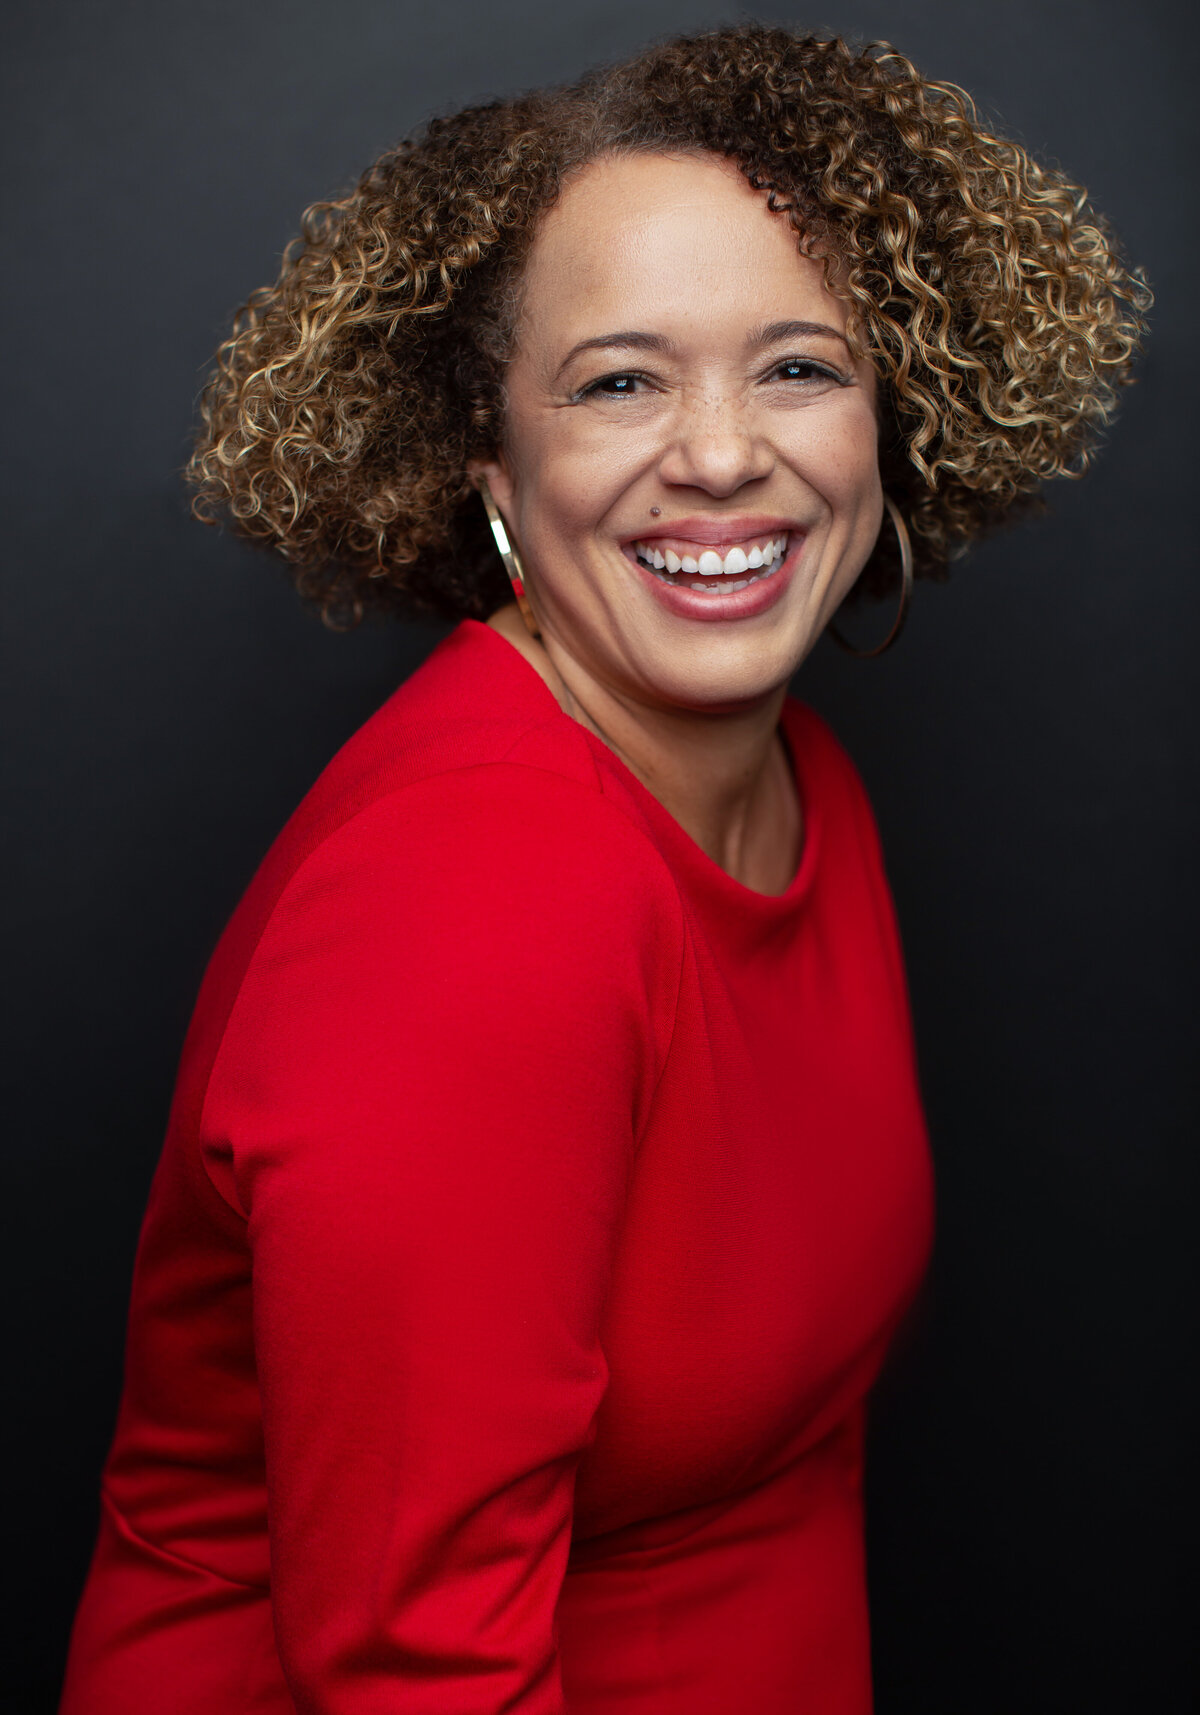 Cincinnati portrait showcasing a light-skinned woman with vibrant curly hair, beaming in a striking red top against a dark background. Her genuine smile and confident demeanor highlight the essence of modern studio photography.